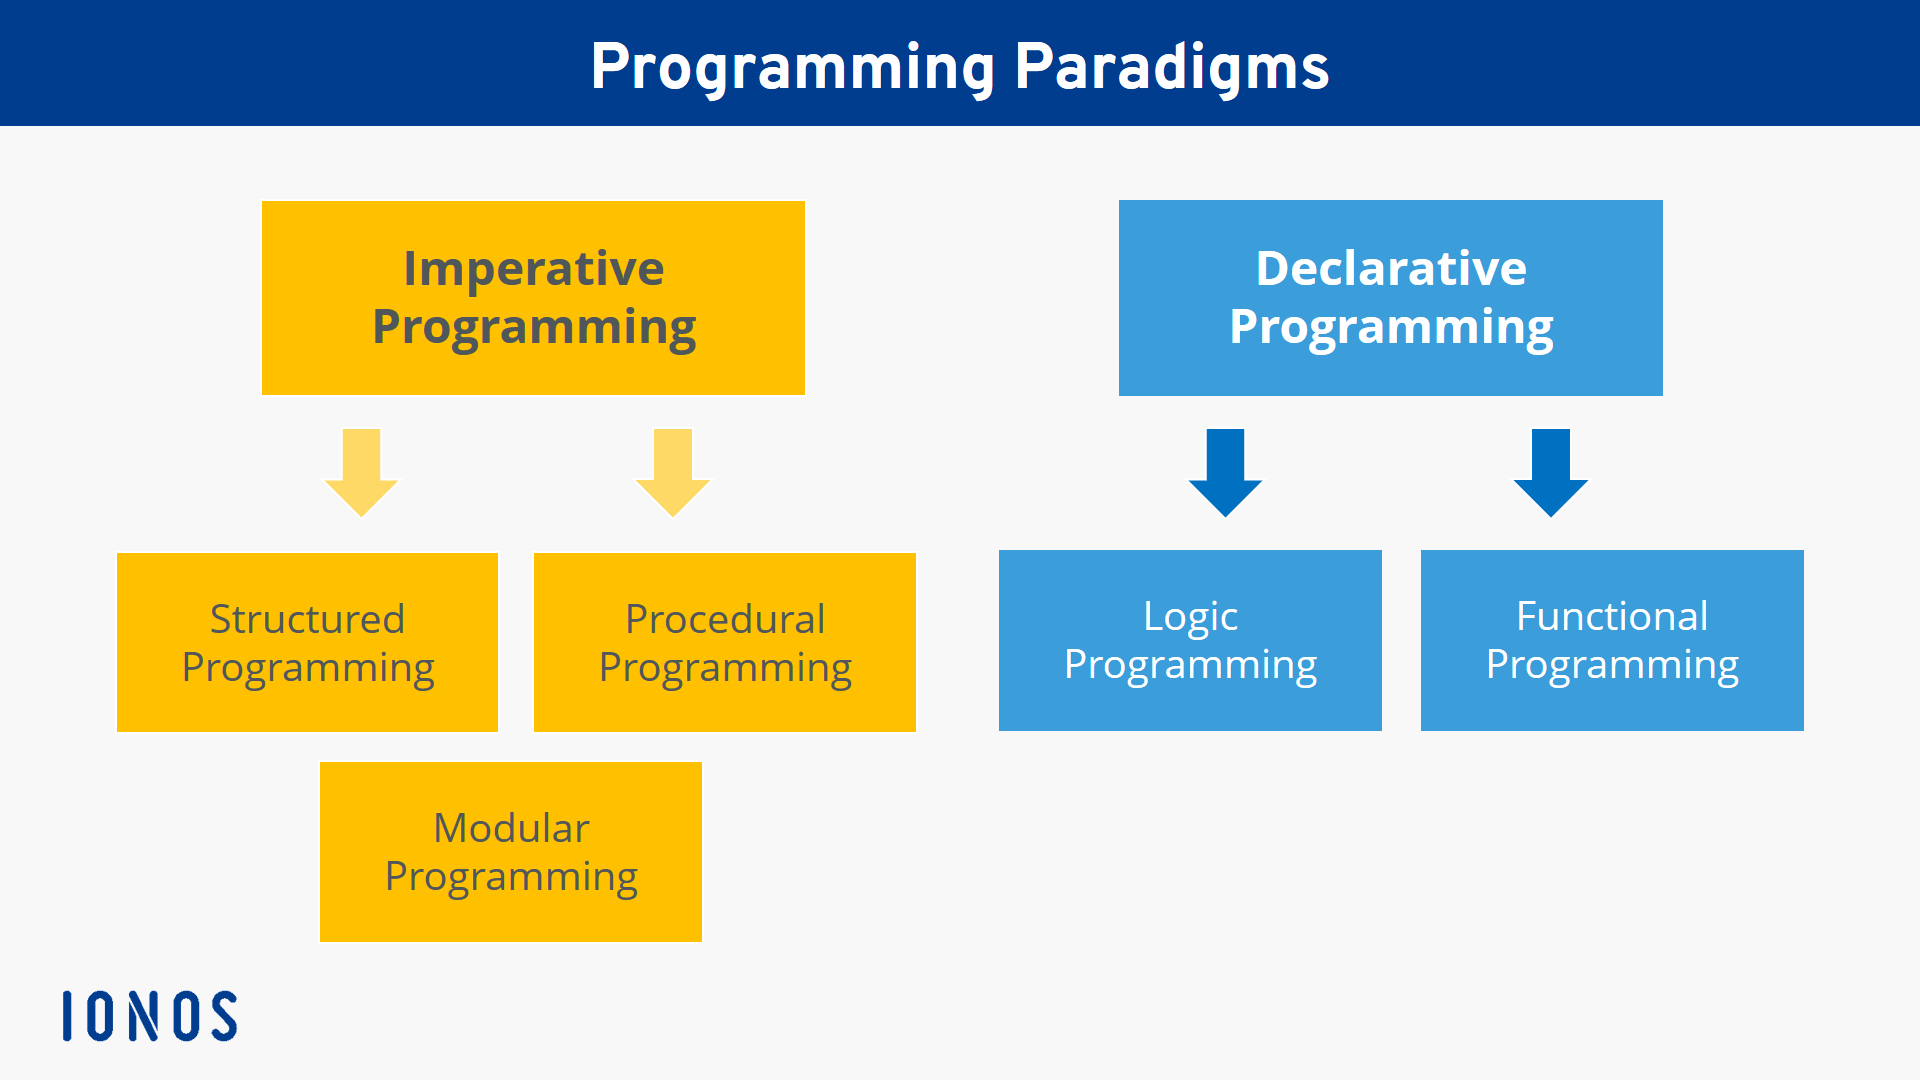 Overview of programming paradigms